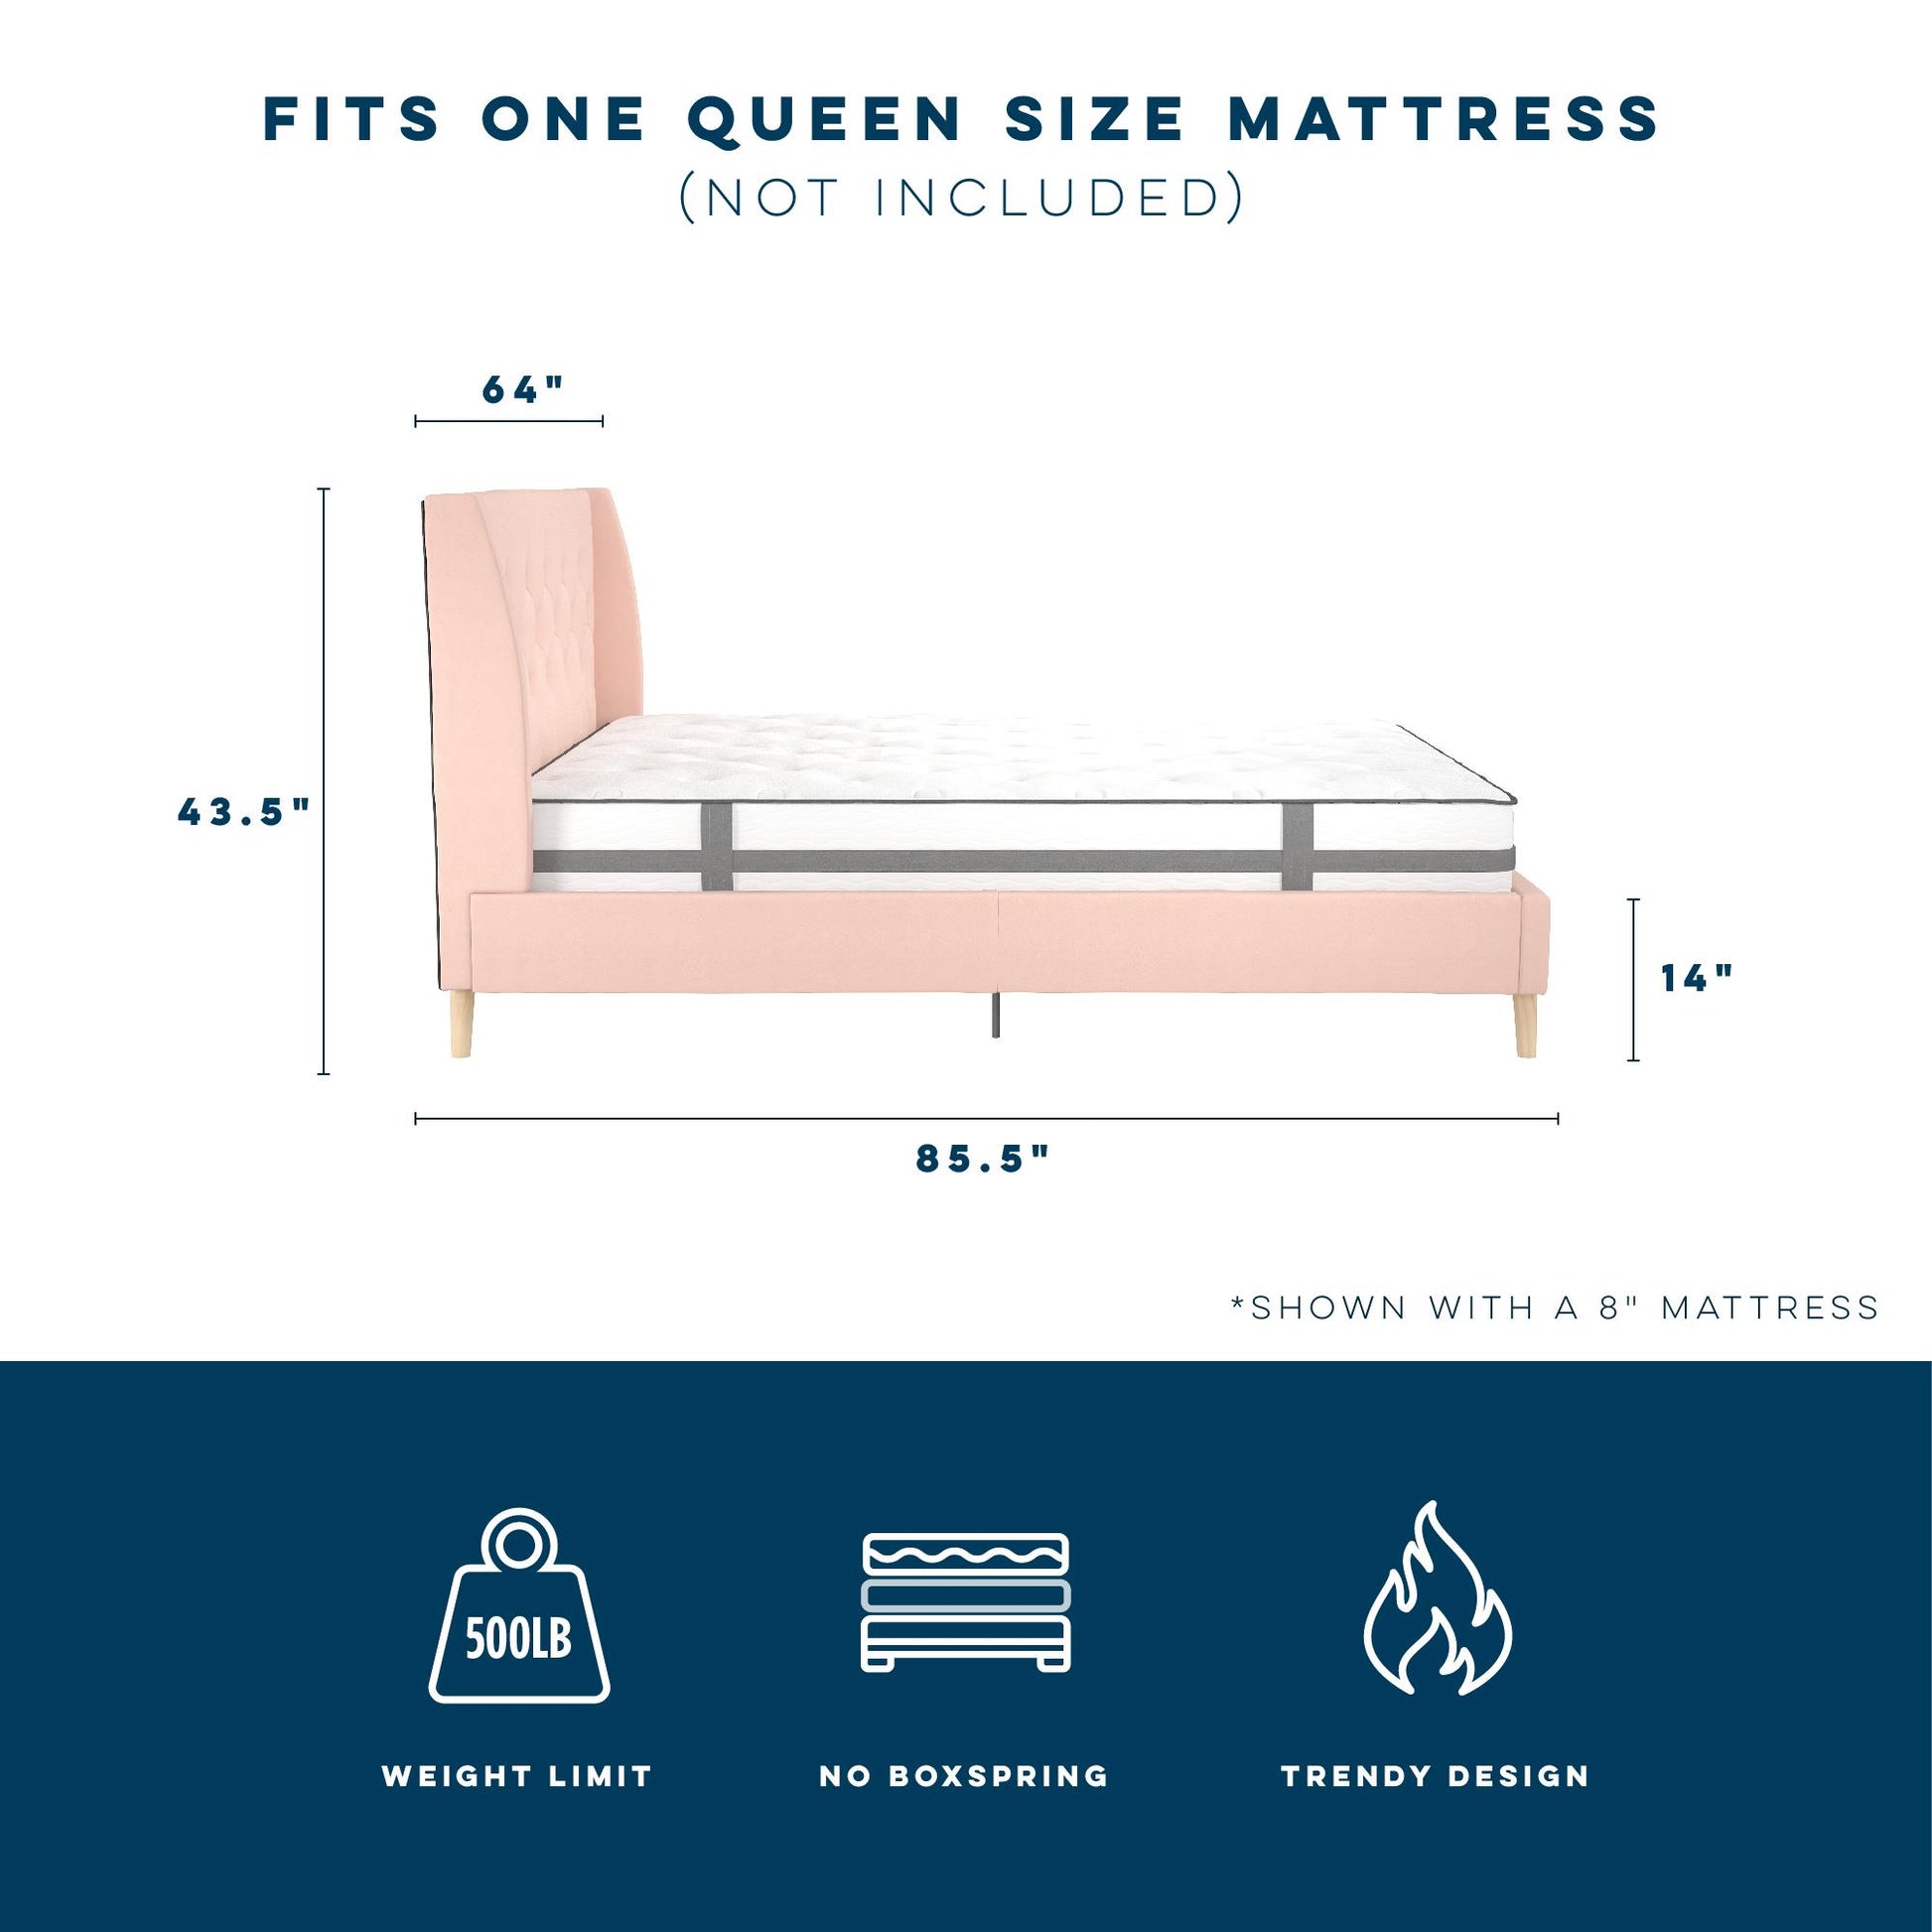 Her Majesty Bed - Pink - Queen